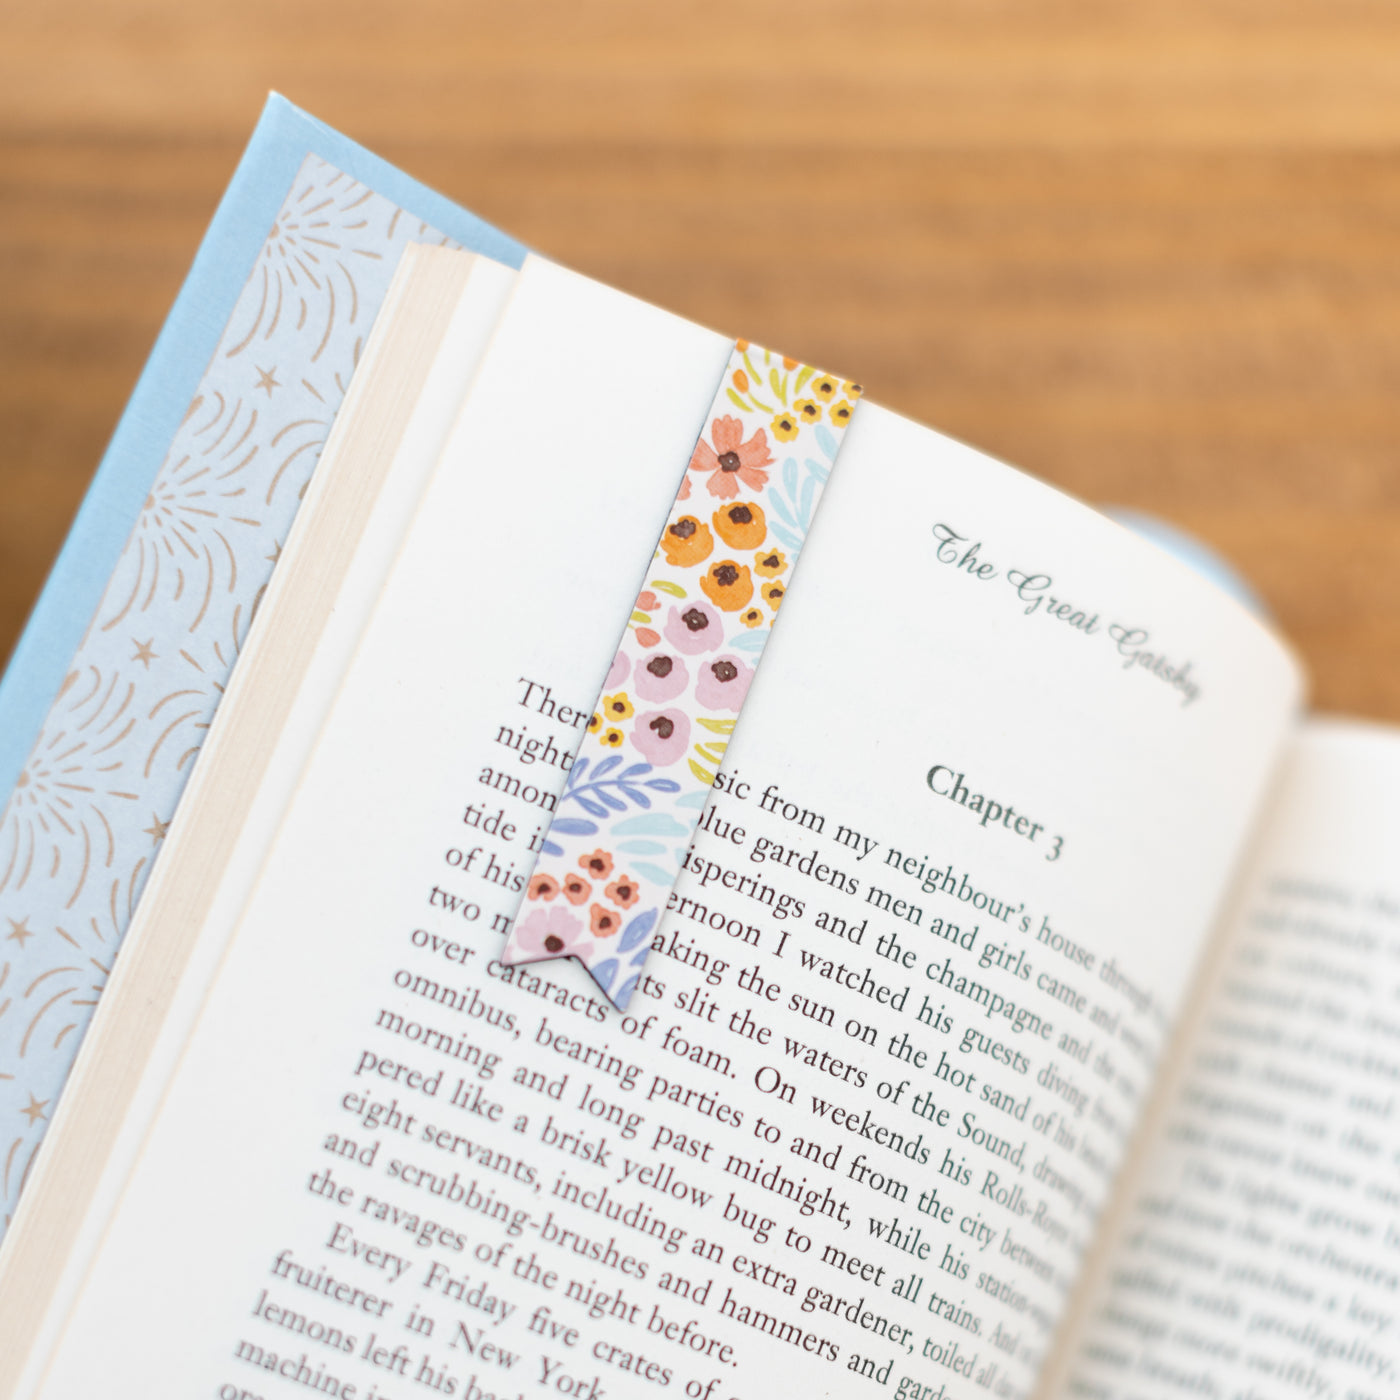 Magnetic Bookmarks